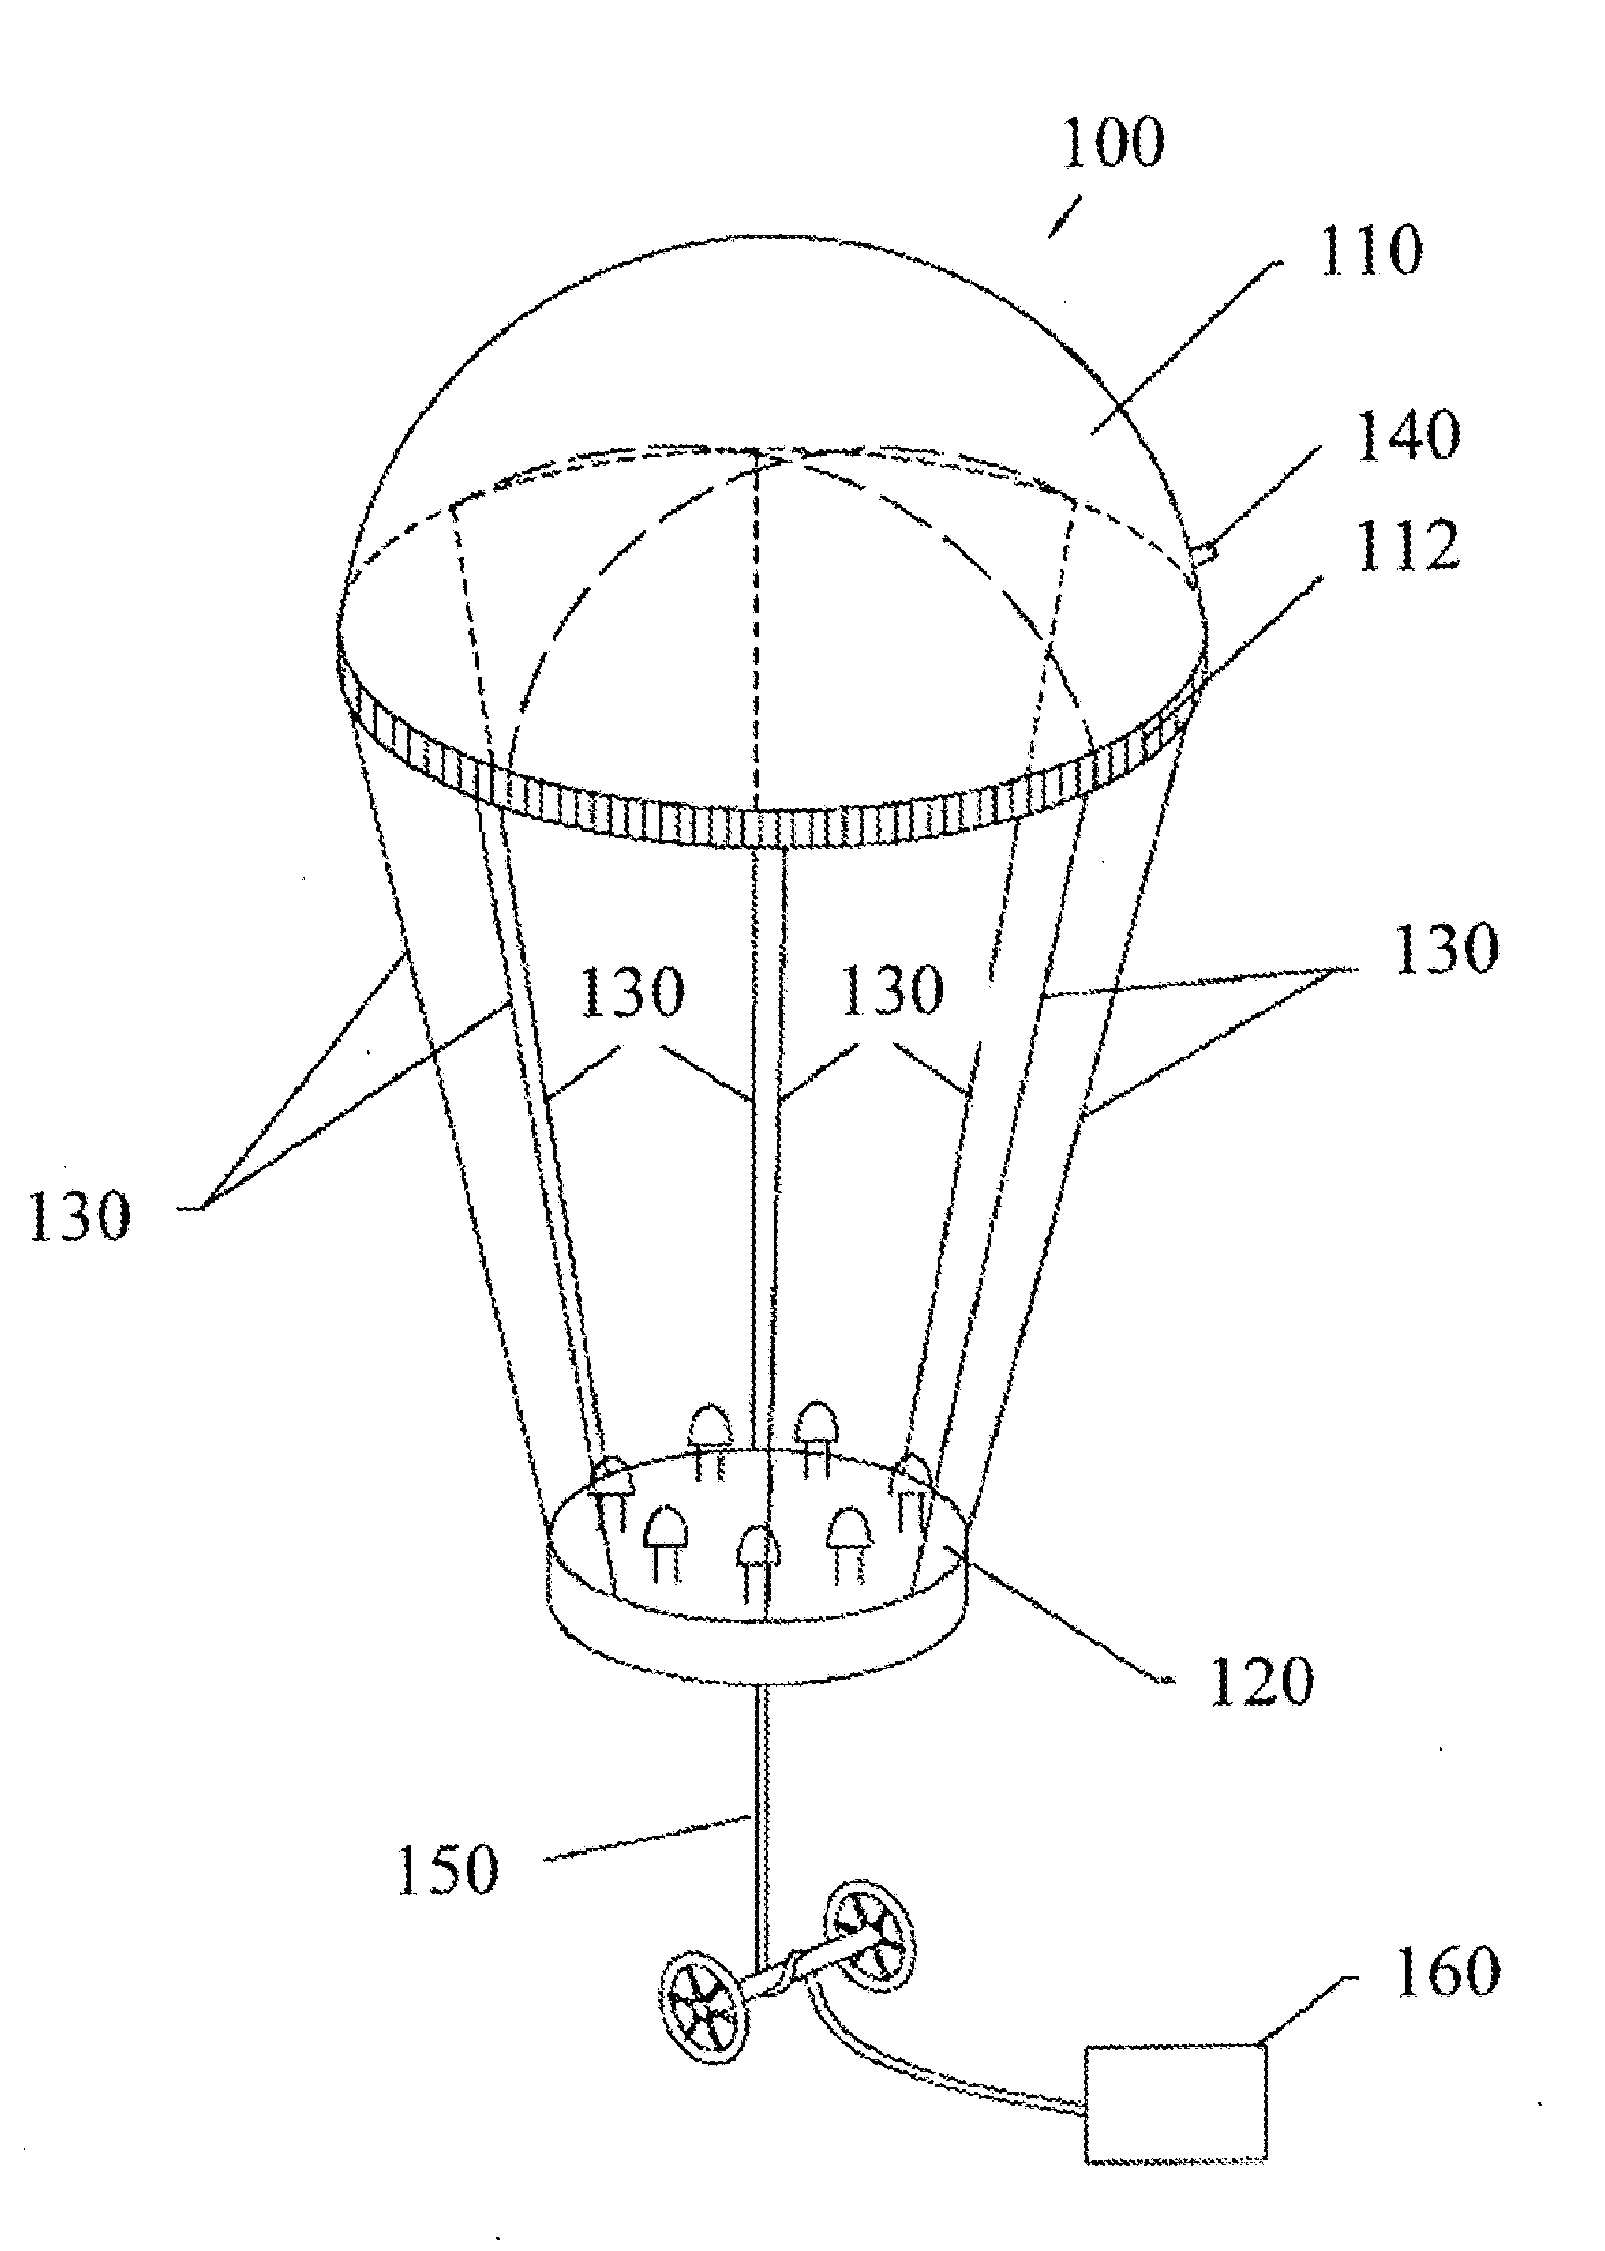 Inflatable Lighting and Display Apparatuses and Systems